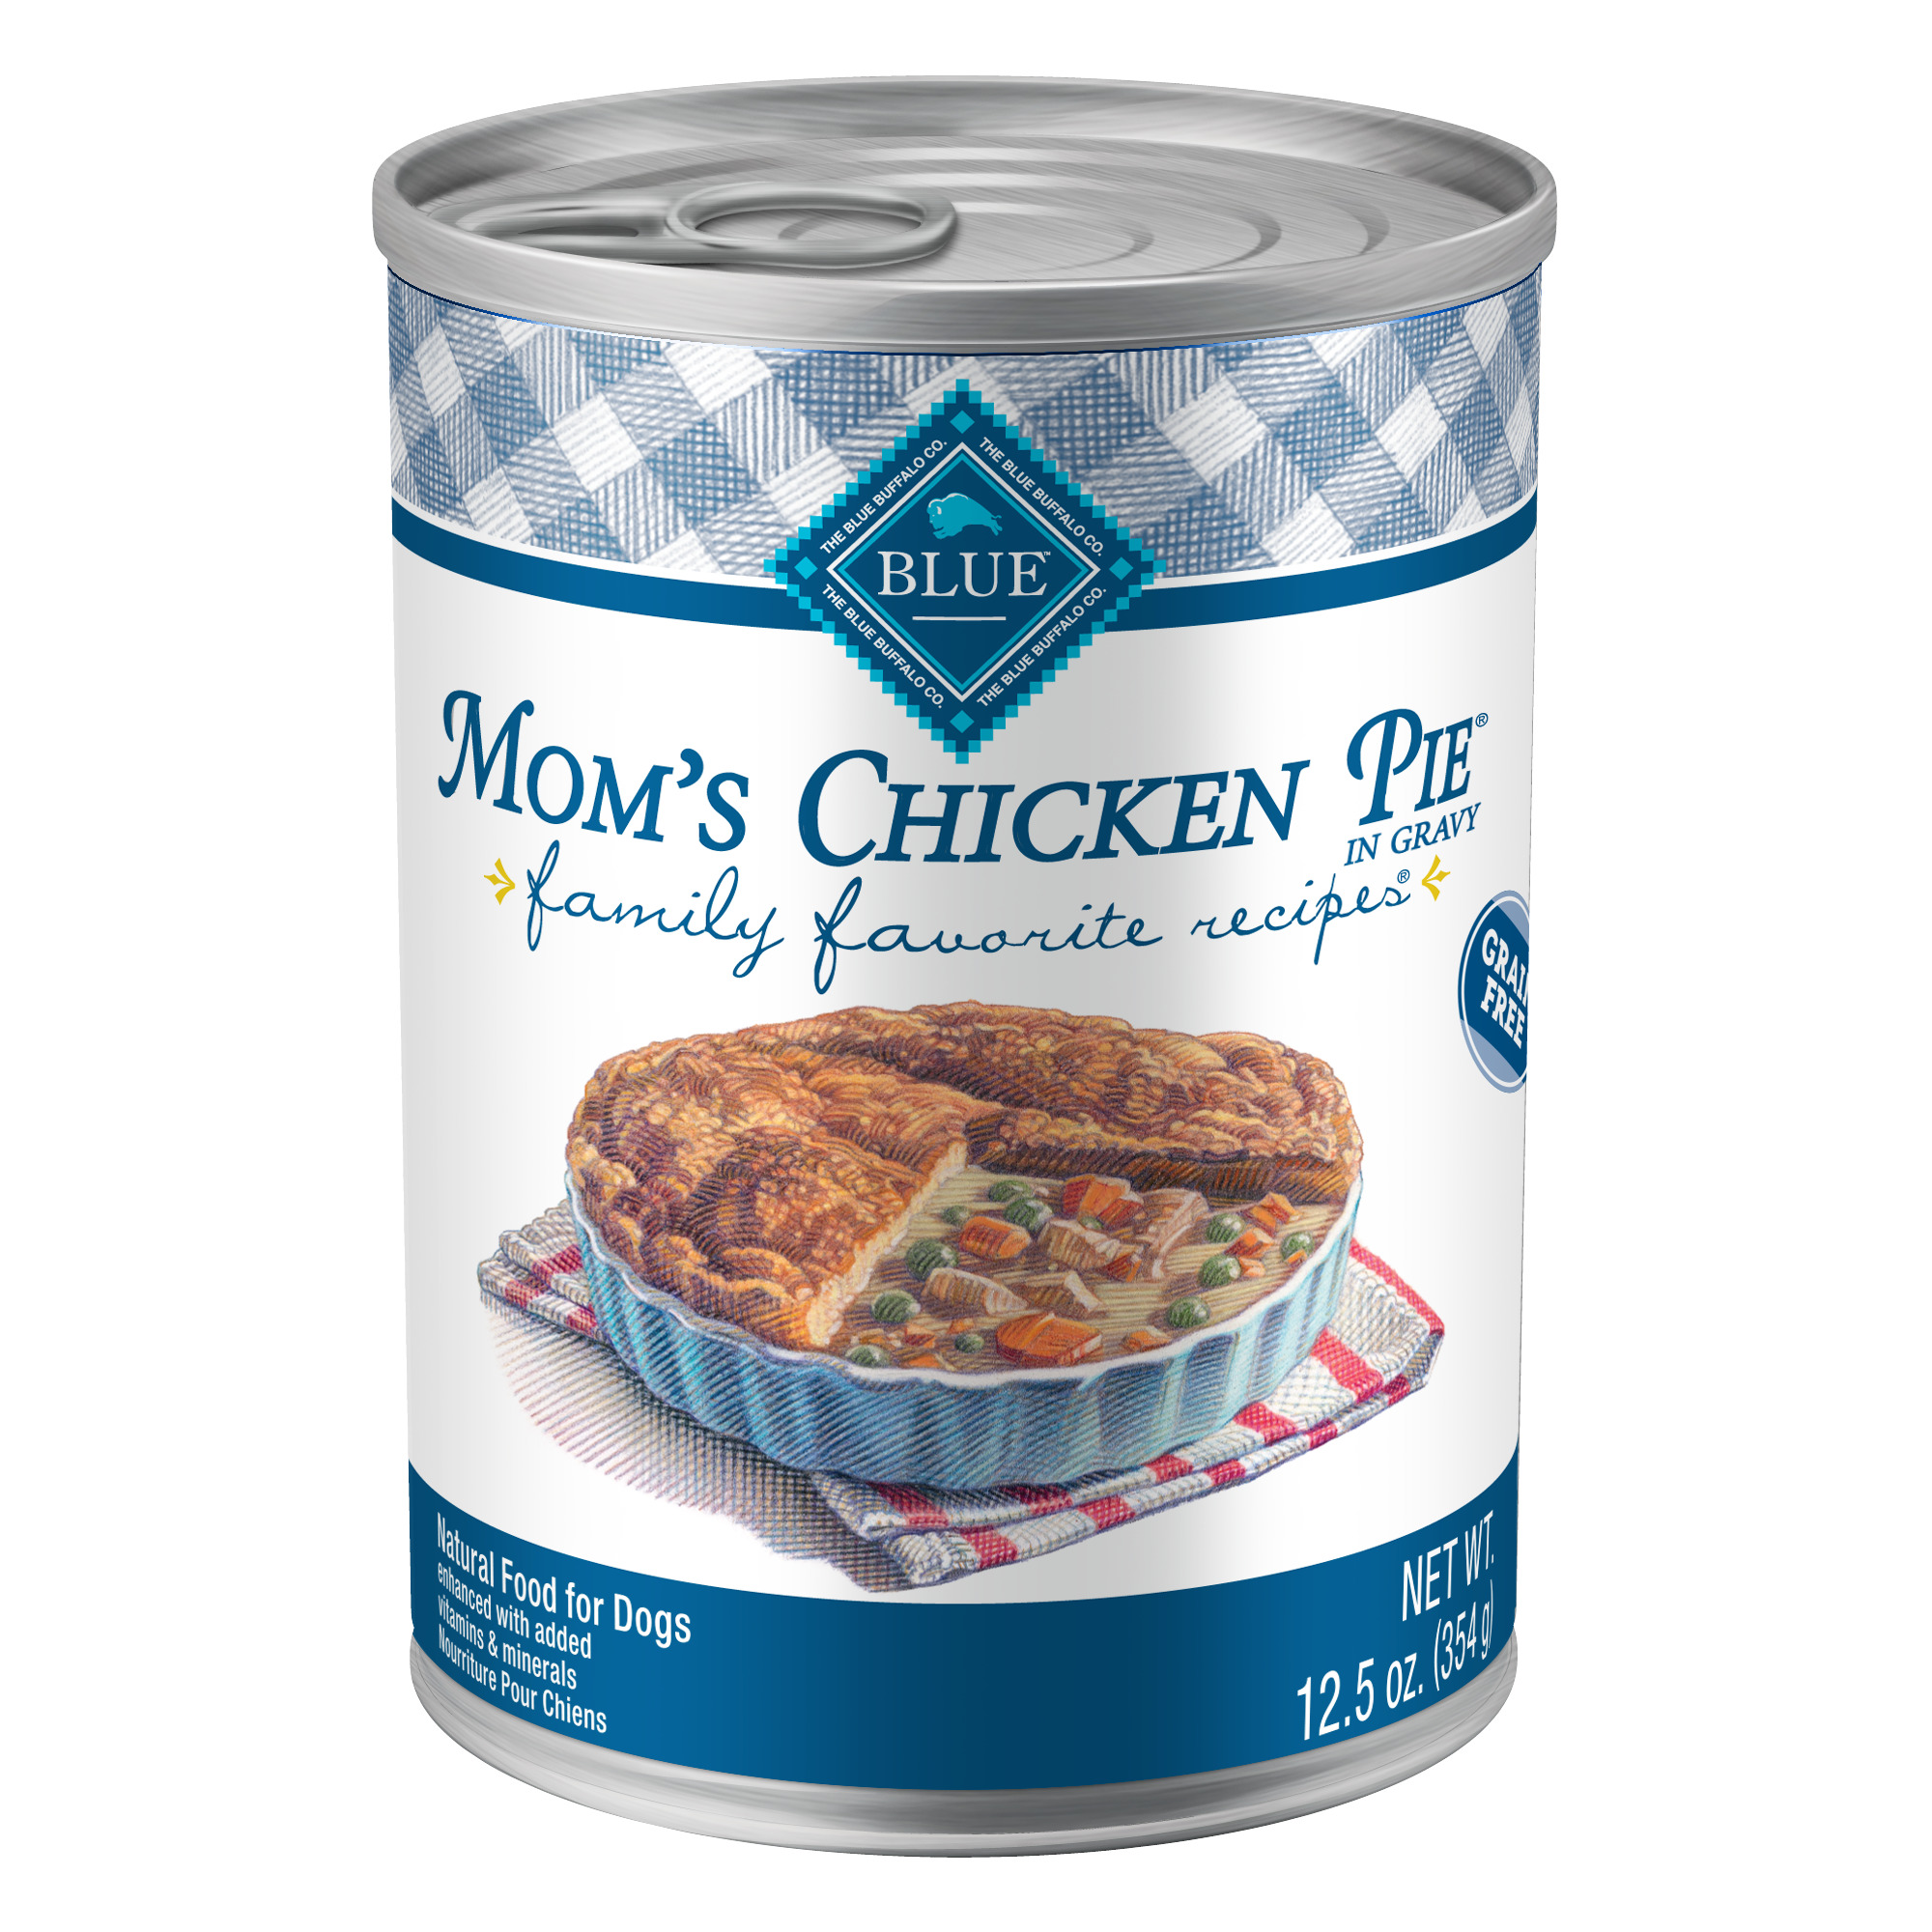 BLUE Family Favorite Recipes Mom's Chicken Pie for Adult Dogs, 12.5 oz